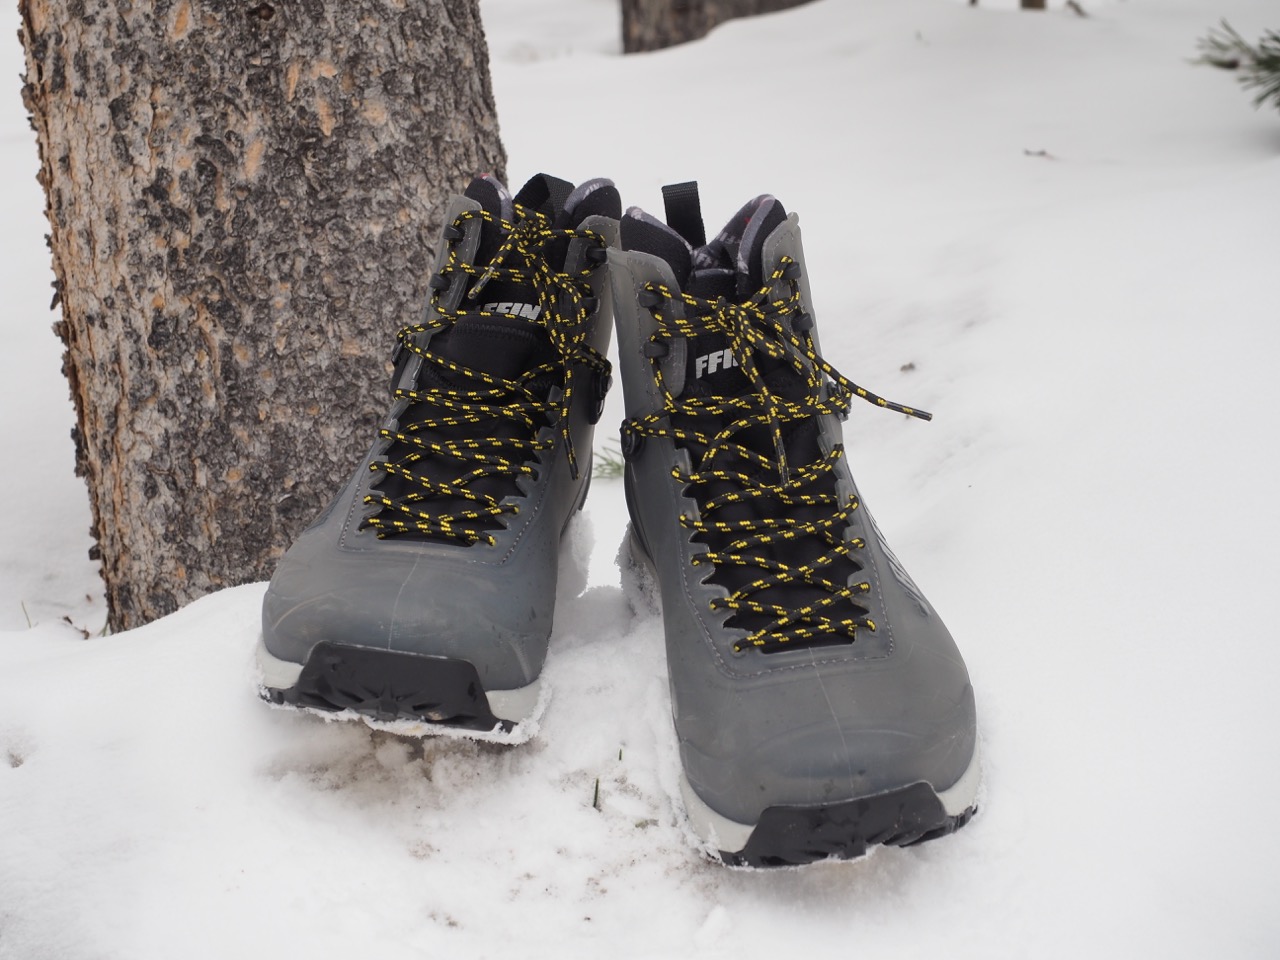 Review: Baffin Borealis Boots – Red Rocks Review